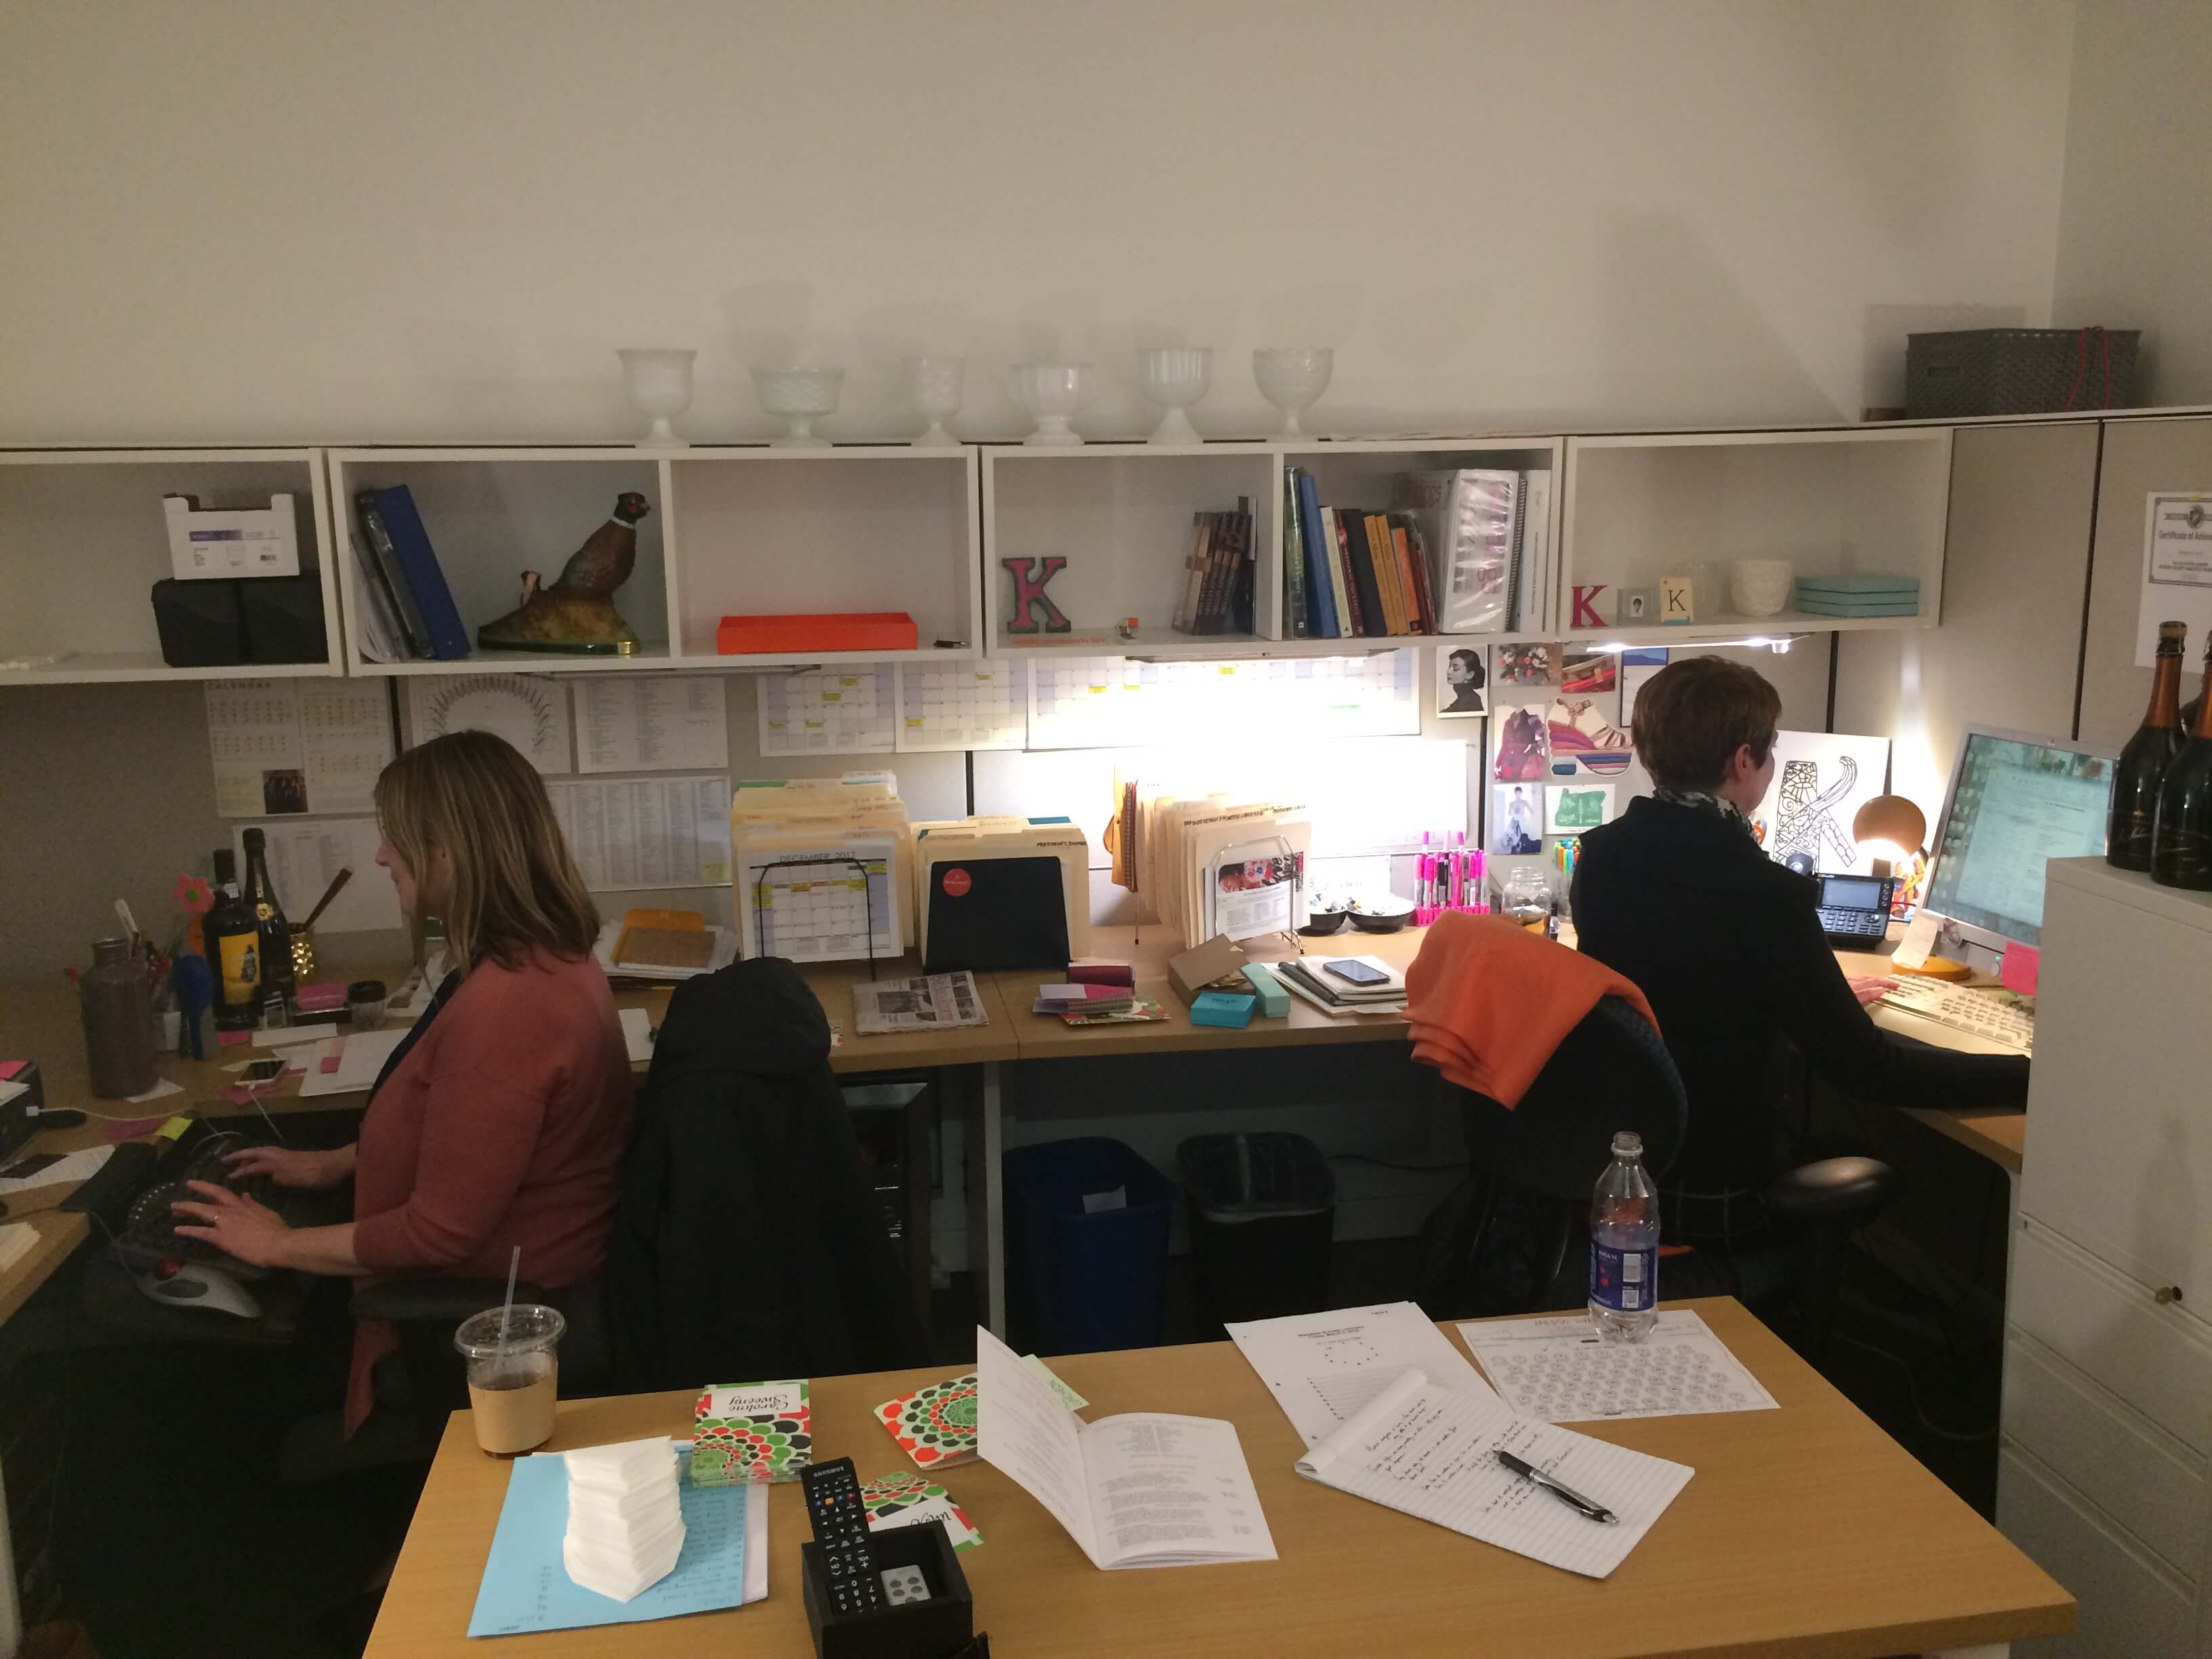 Katie (left) and Karman (right) at work in the Events office at the Opera.